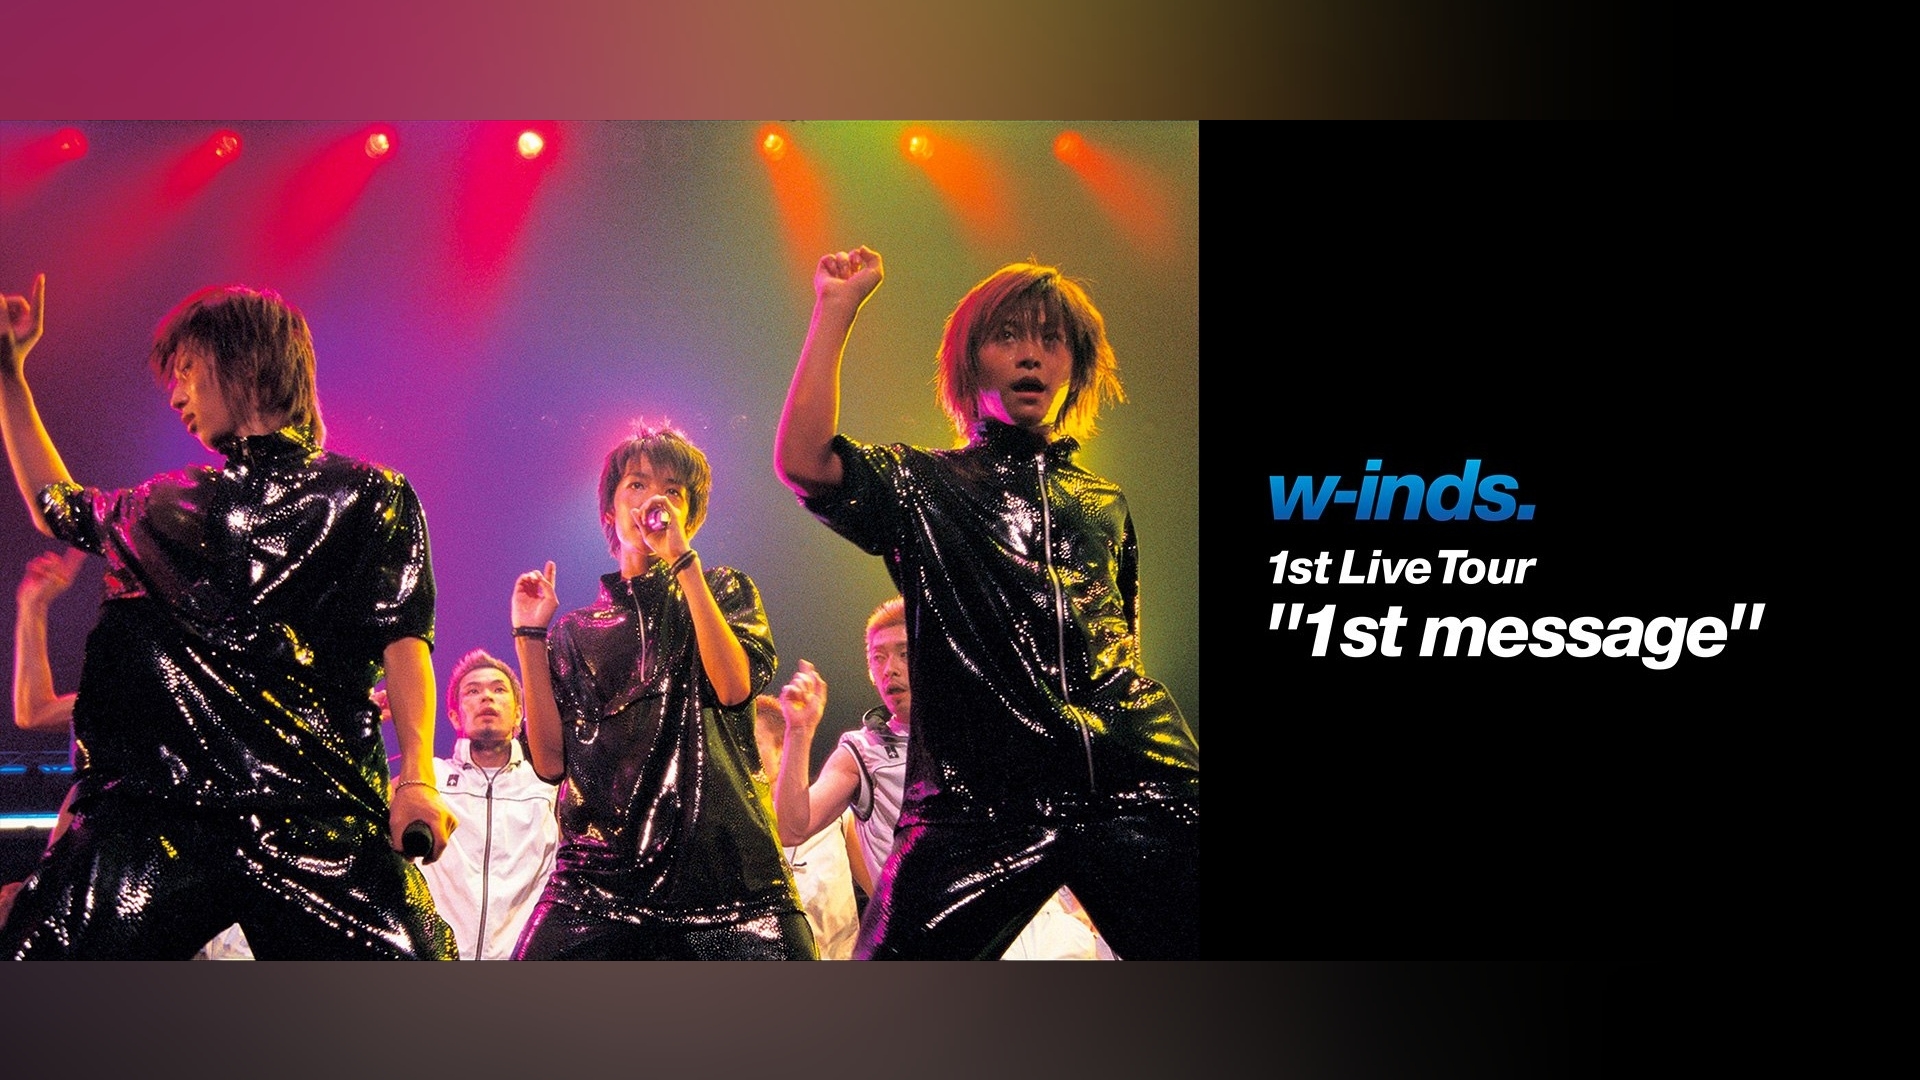 w-inds.1st Live Tour “1st message”(Blu-ray) khxv5rg